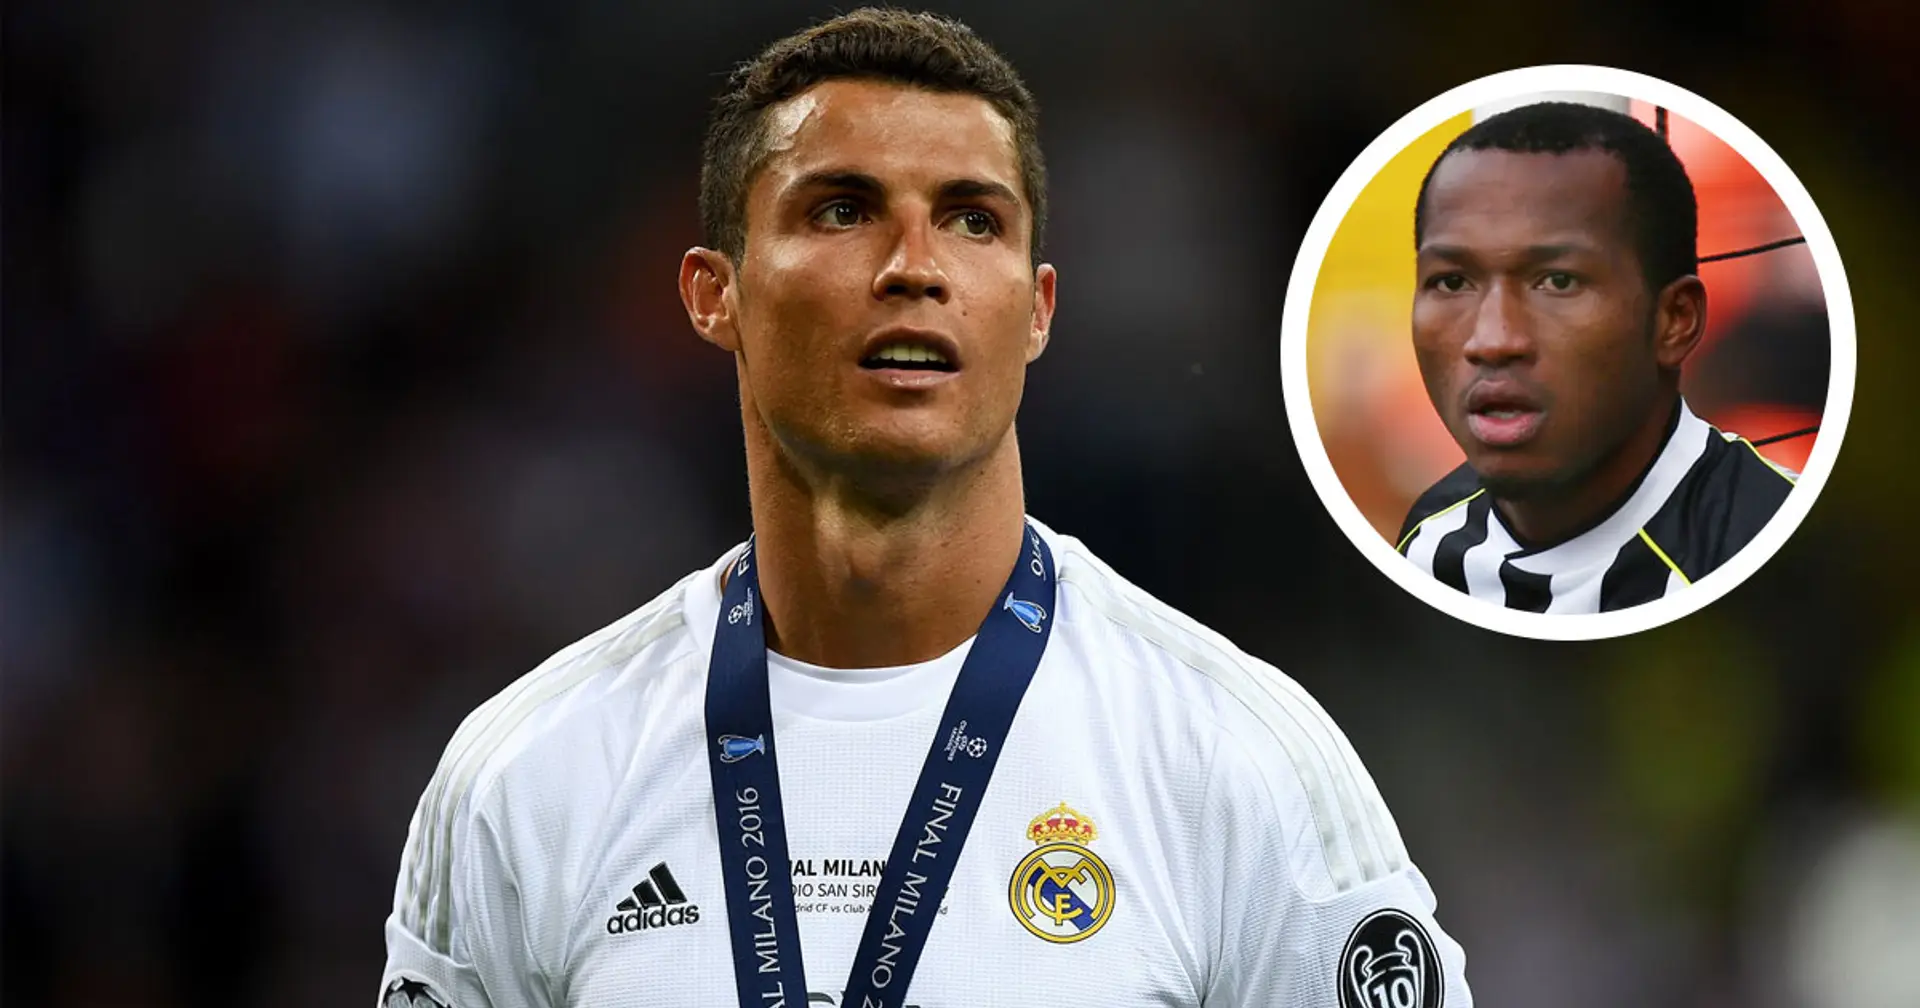 'My mum died in 2010 and he was there for me despite playing in Madrid': Cristiano Ronaldo's genuine self as told by ex-teammate Eric Djemba-Djemba